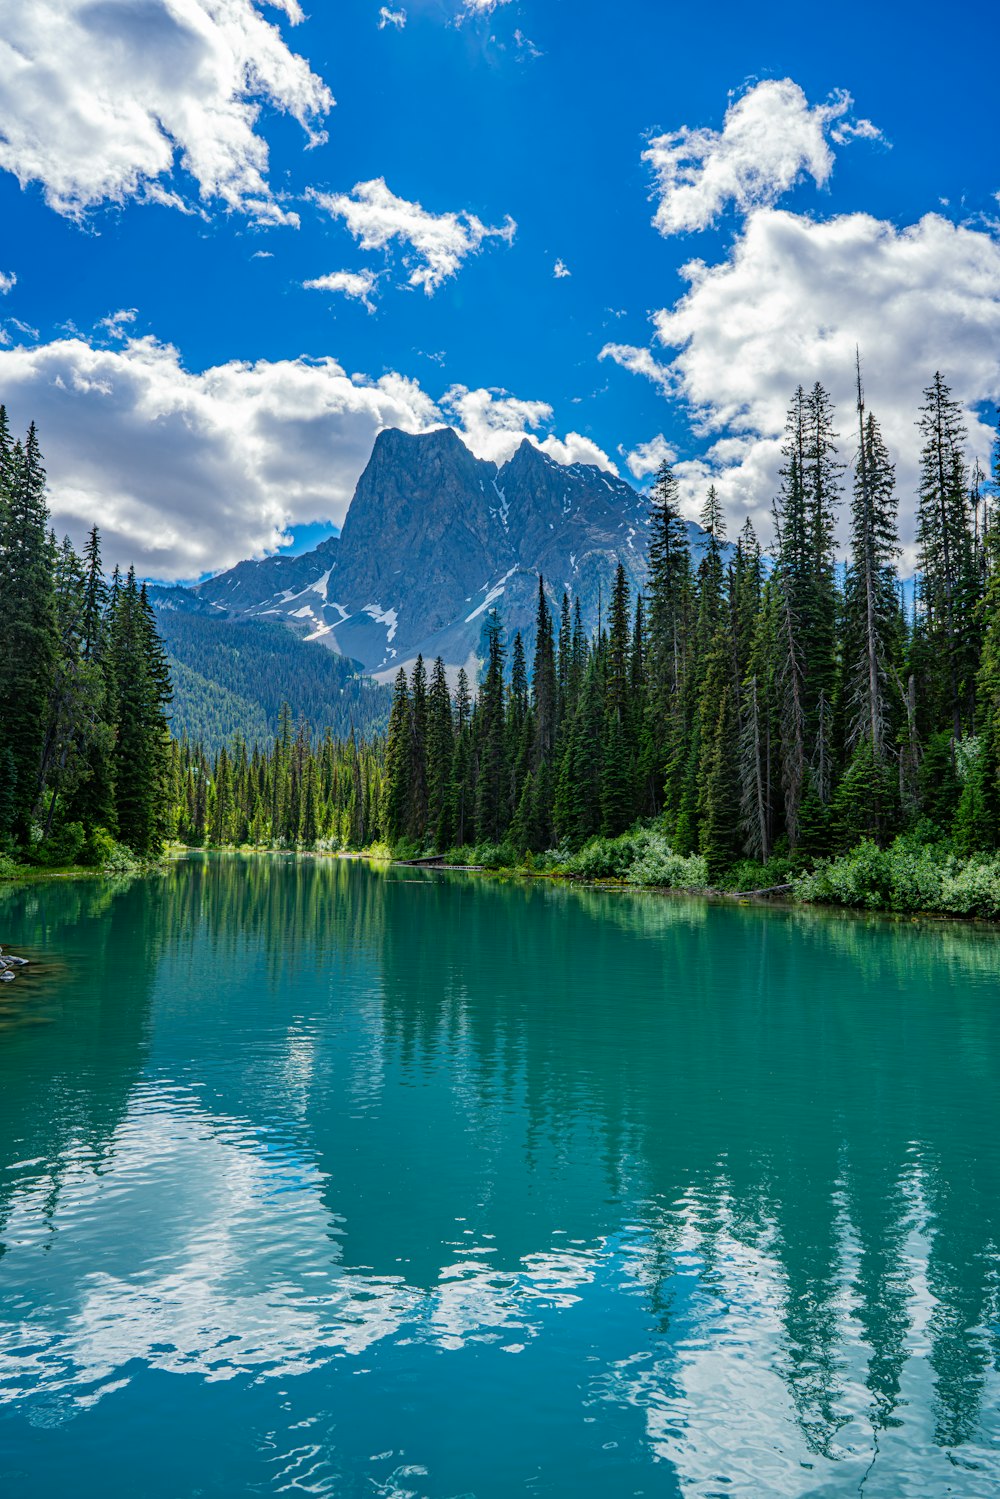 a lake surrounded by trees and a mountain in the background